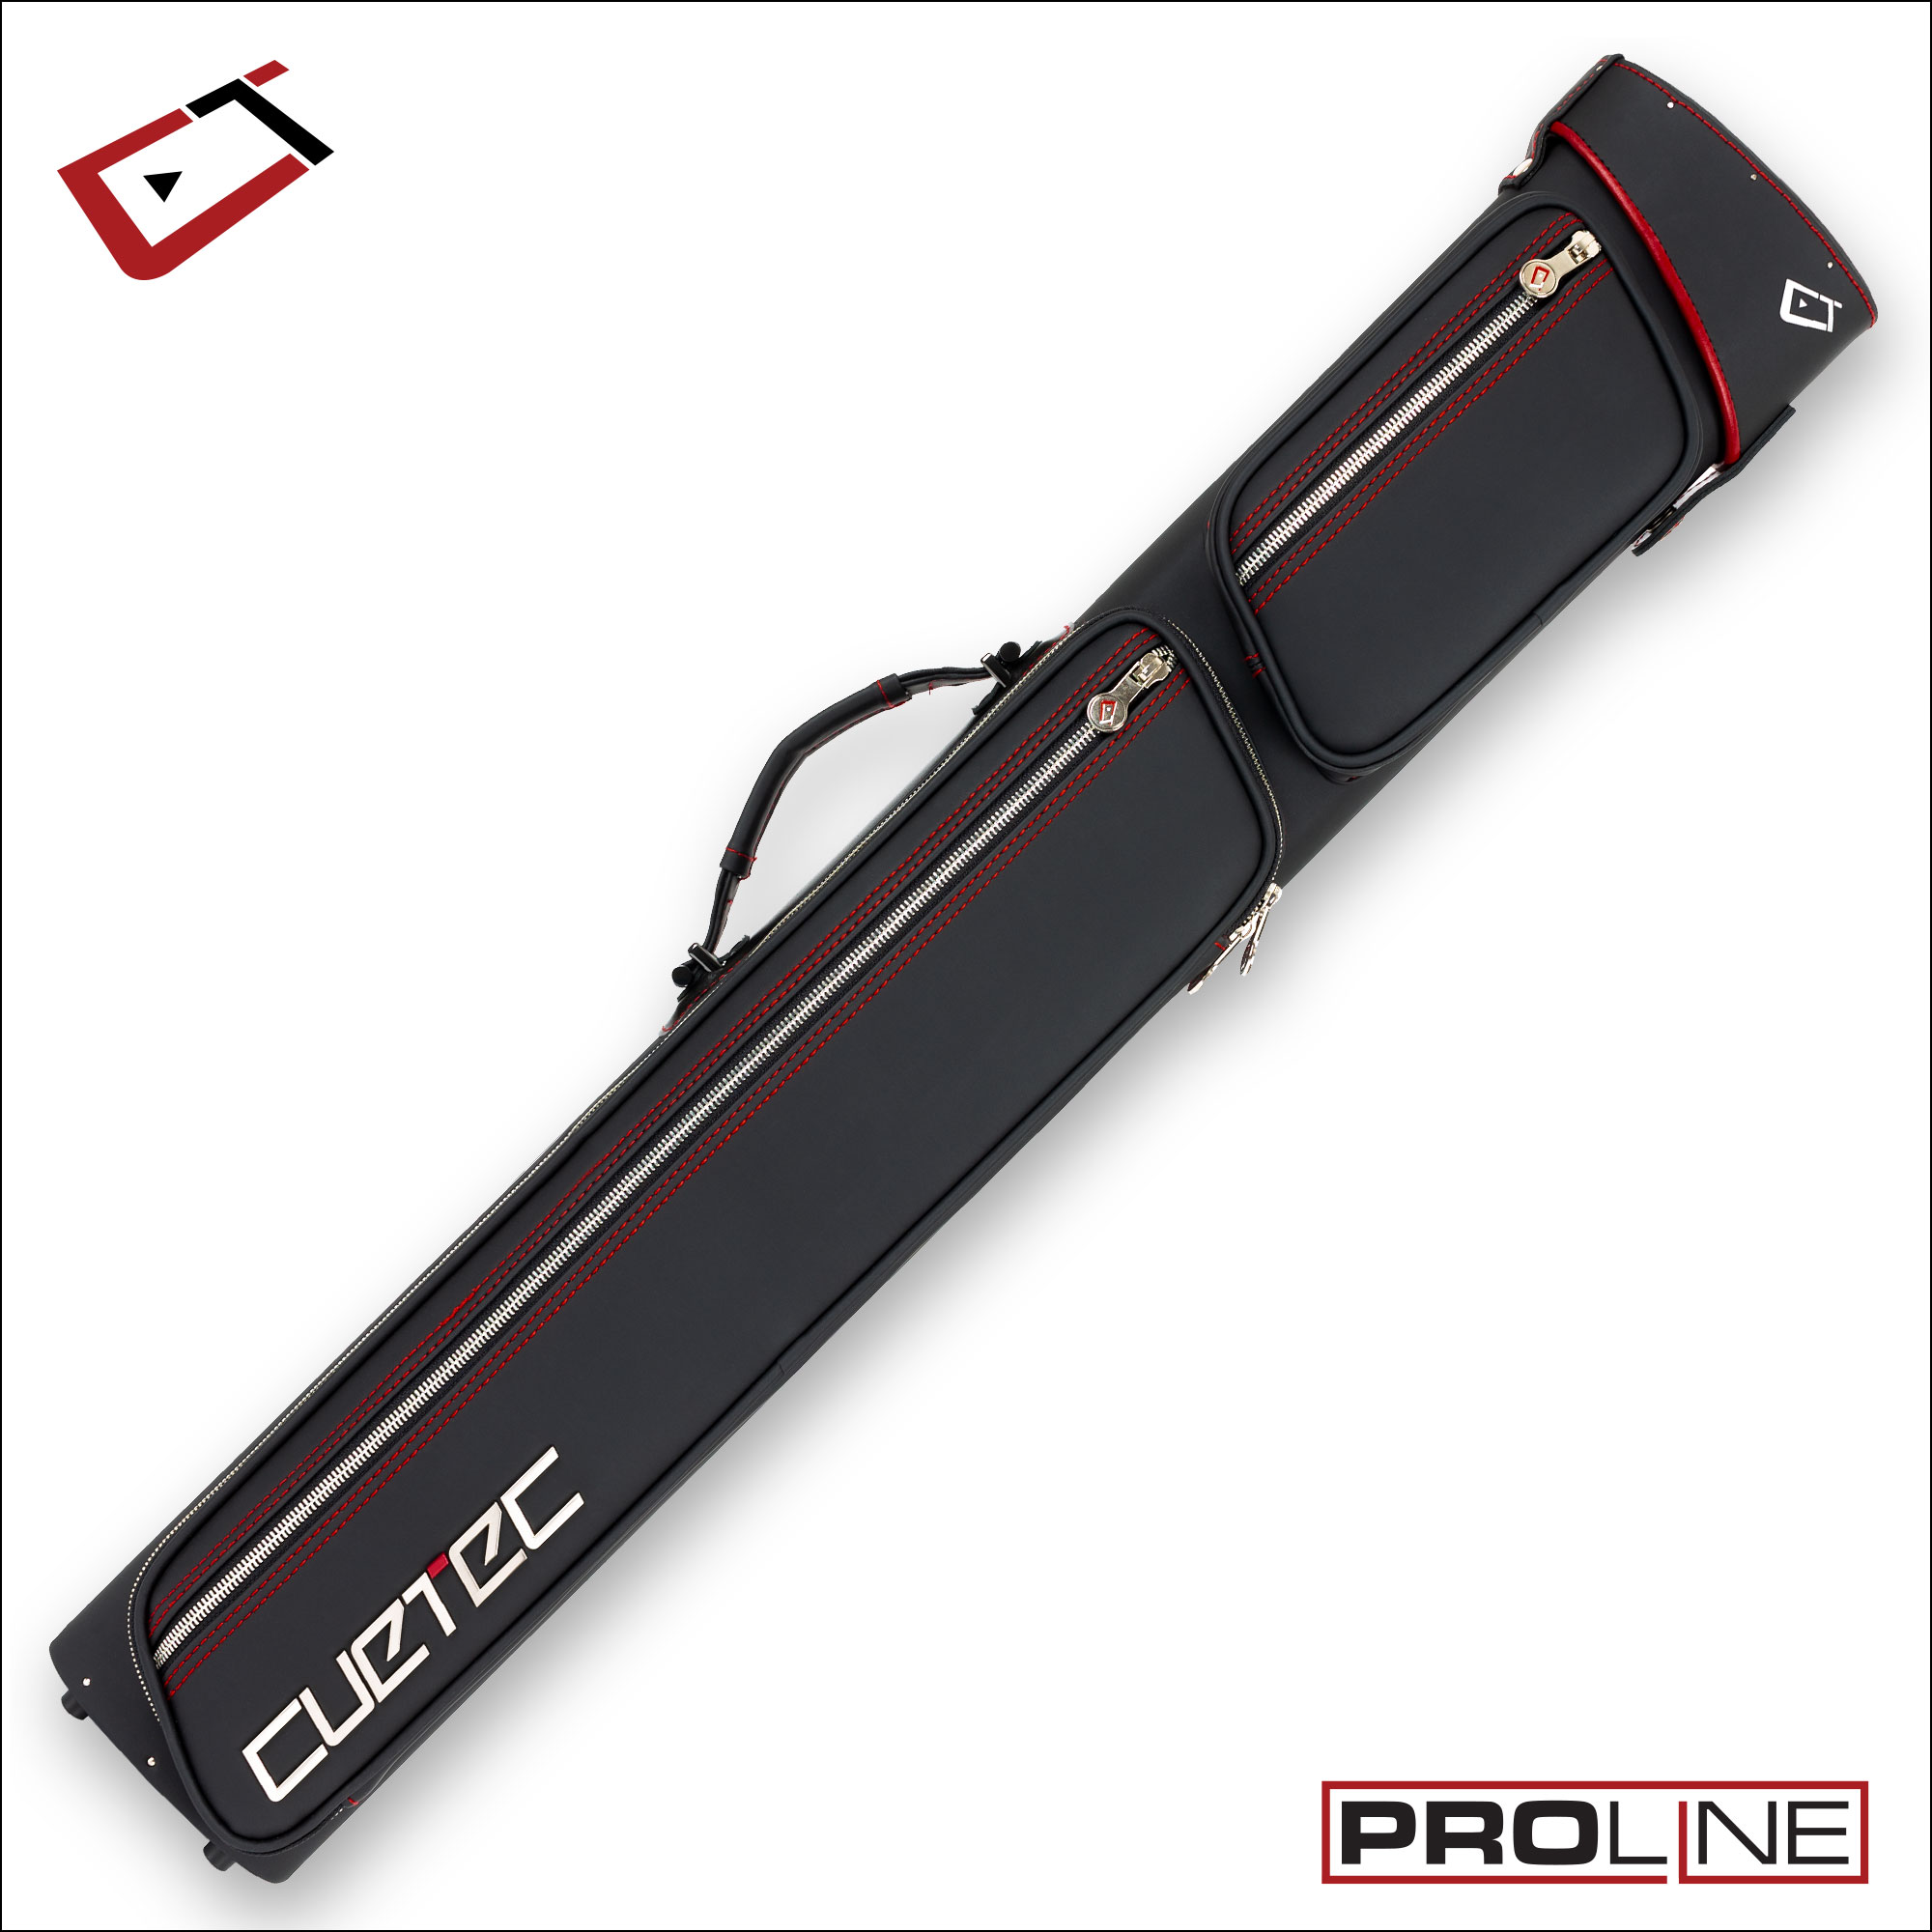 Hard Cue Case for 2 Shafts EXTENSION POCKET  1B/2S  Pool cue Case  FREE SHIPPING 